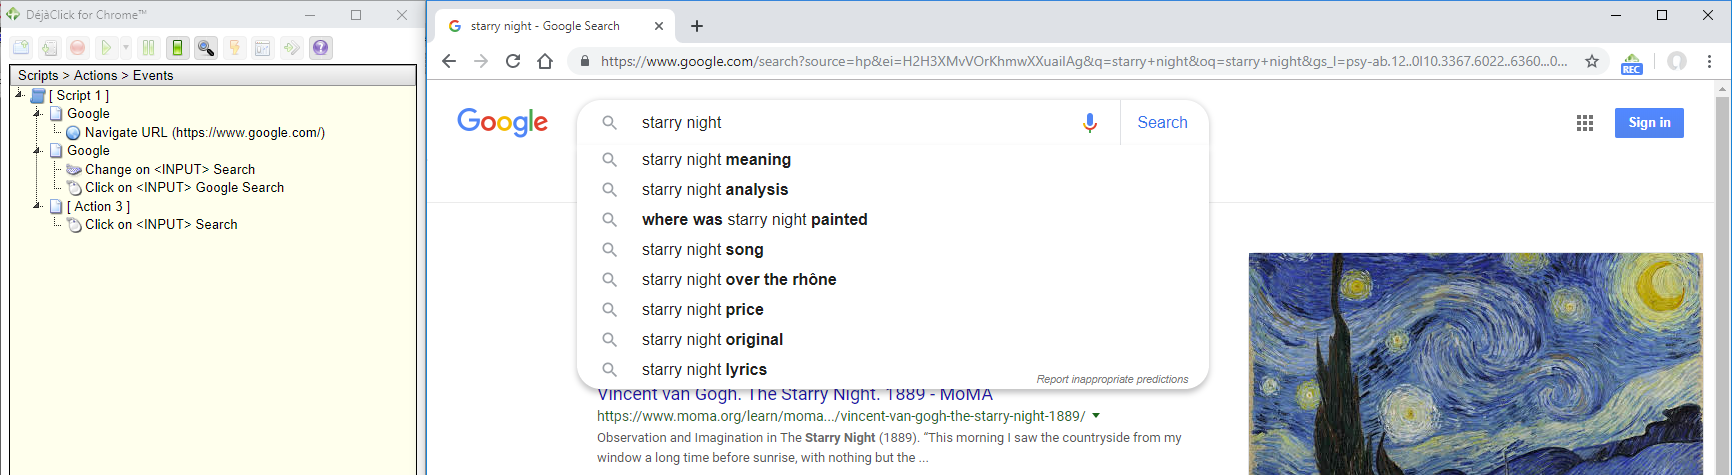 Starry Night search results in Google